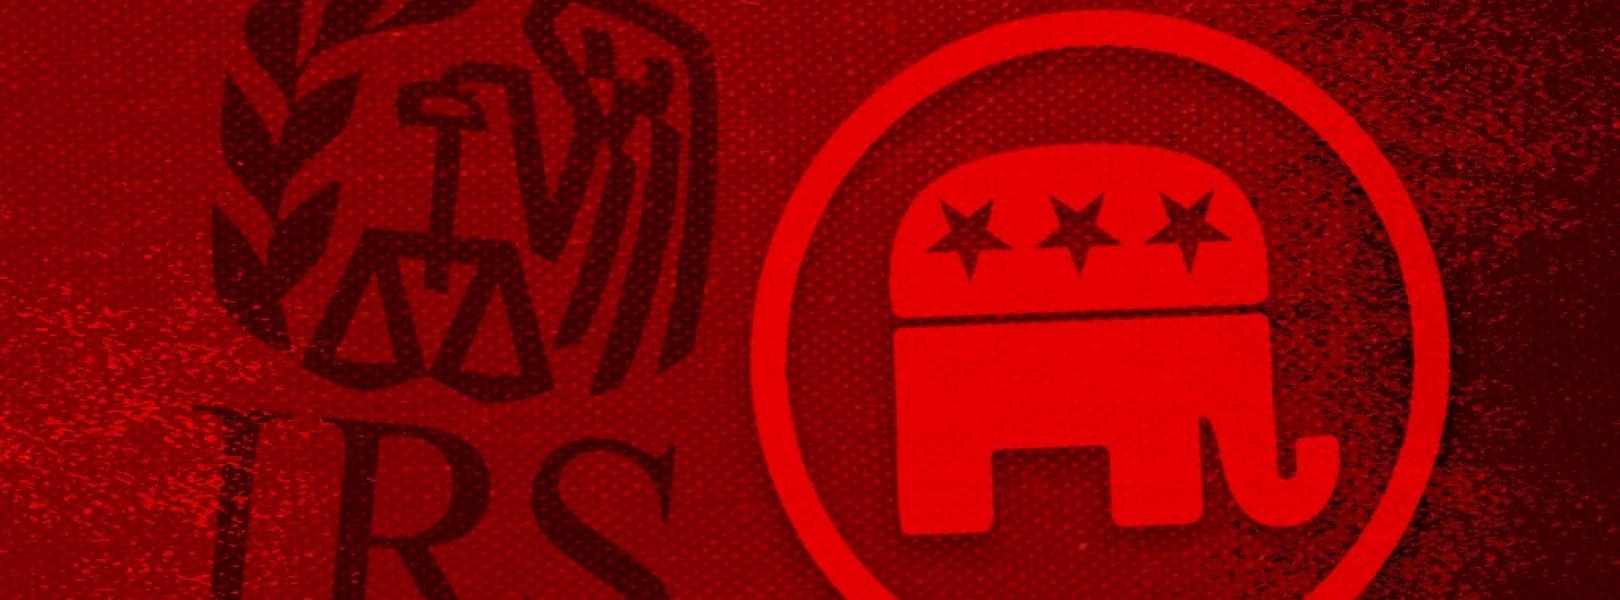 IRS and GOP logos on a red background 